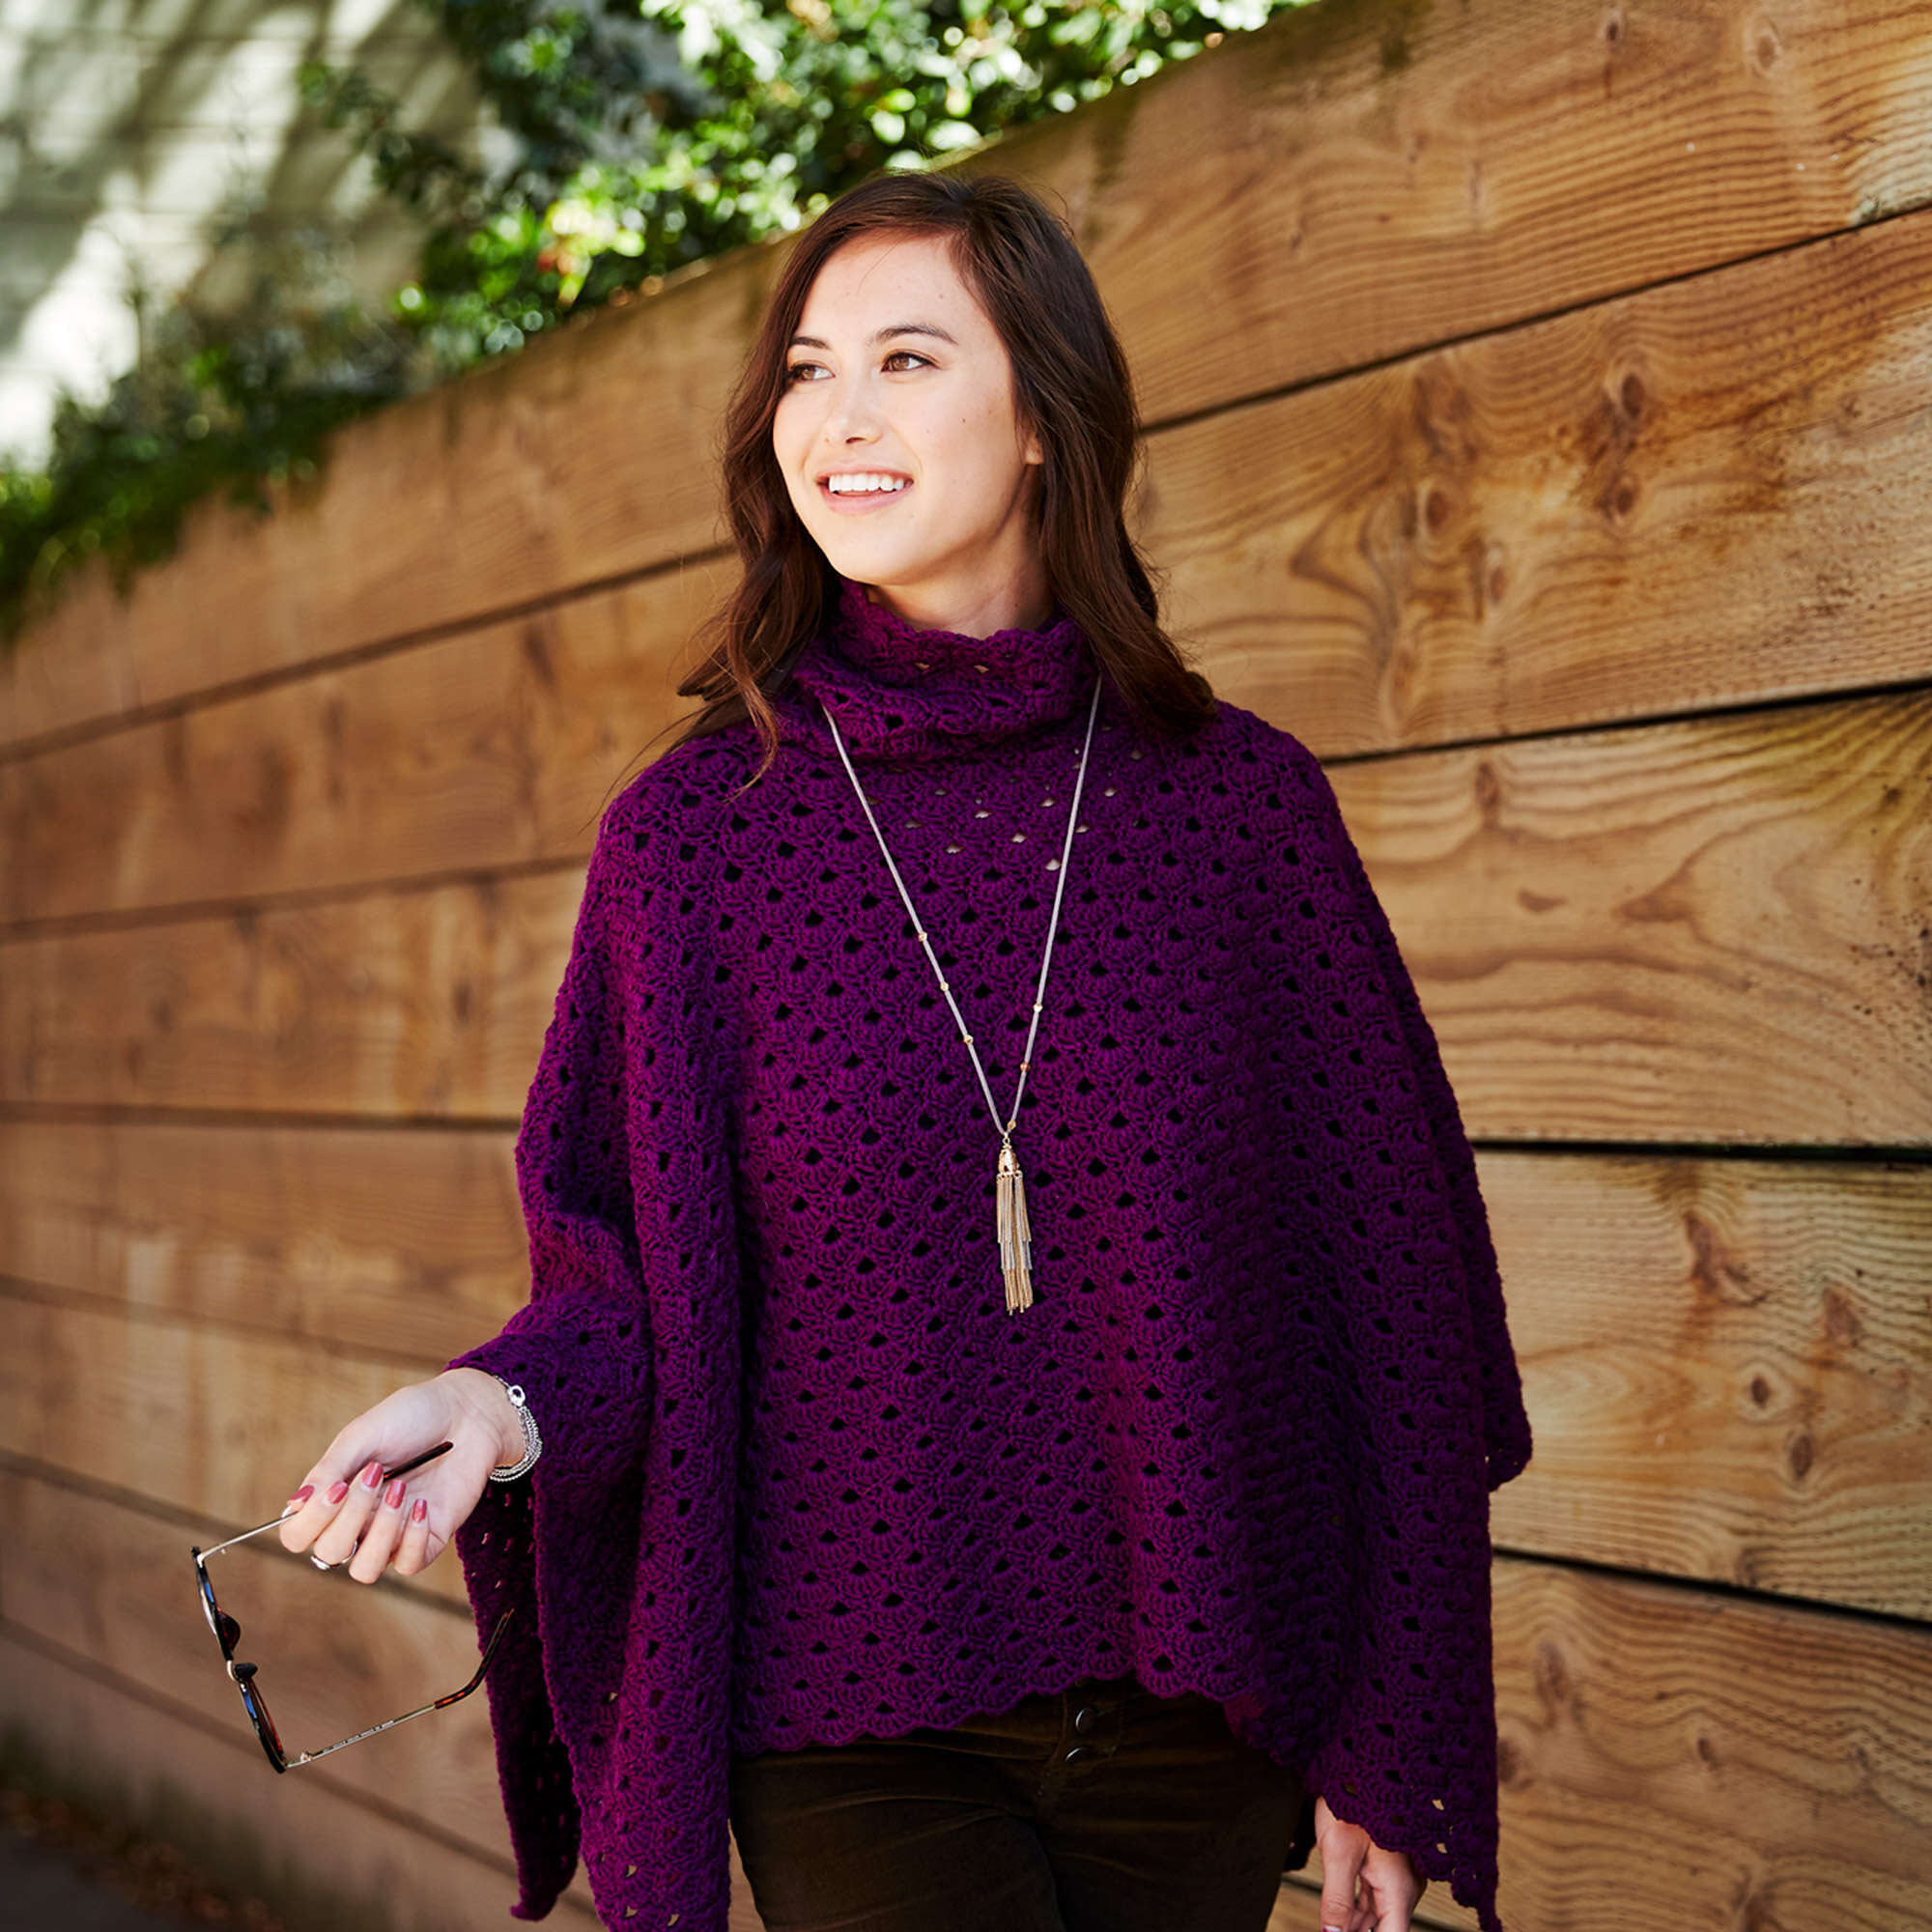 A woman with a cheerful expression stands outdoors, wearing a purple easy crochet poncho and holding sunglasses. She gazes to the side against a wooden fence backdrop. -Marly Bird